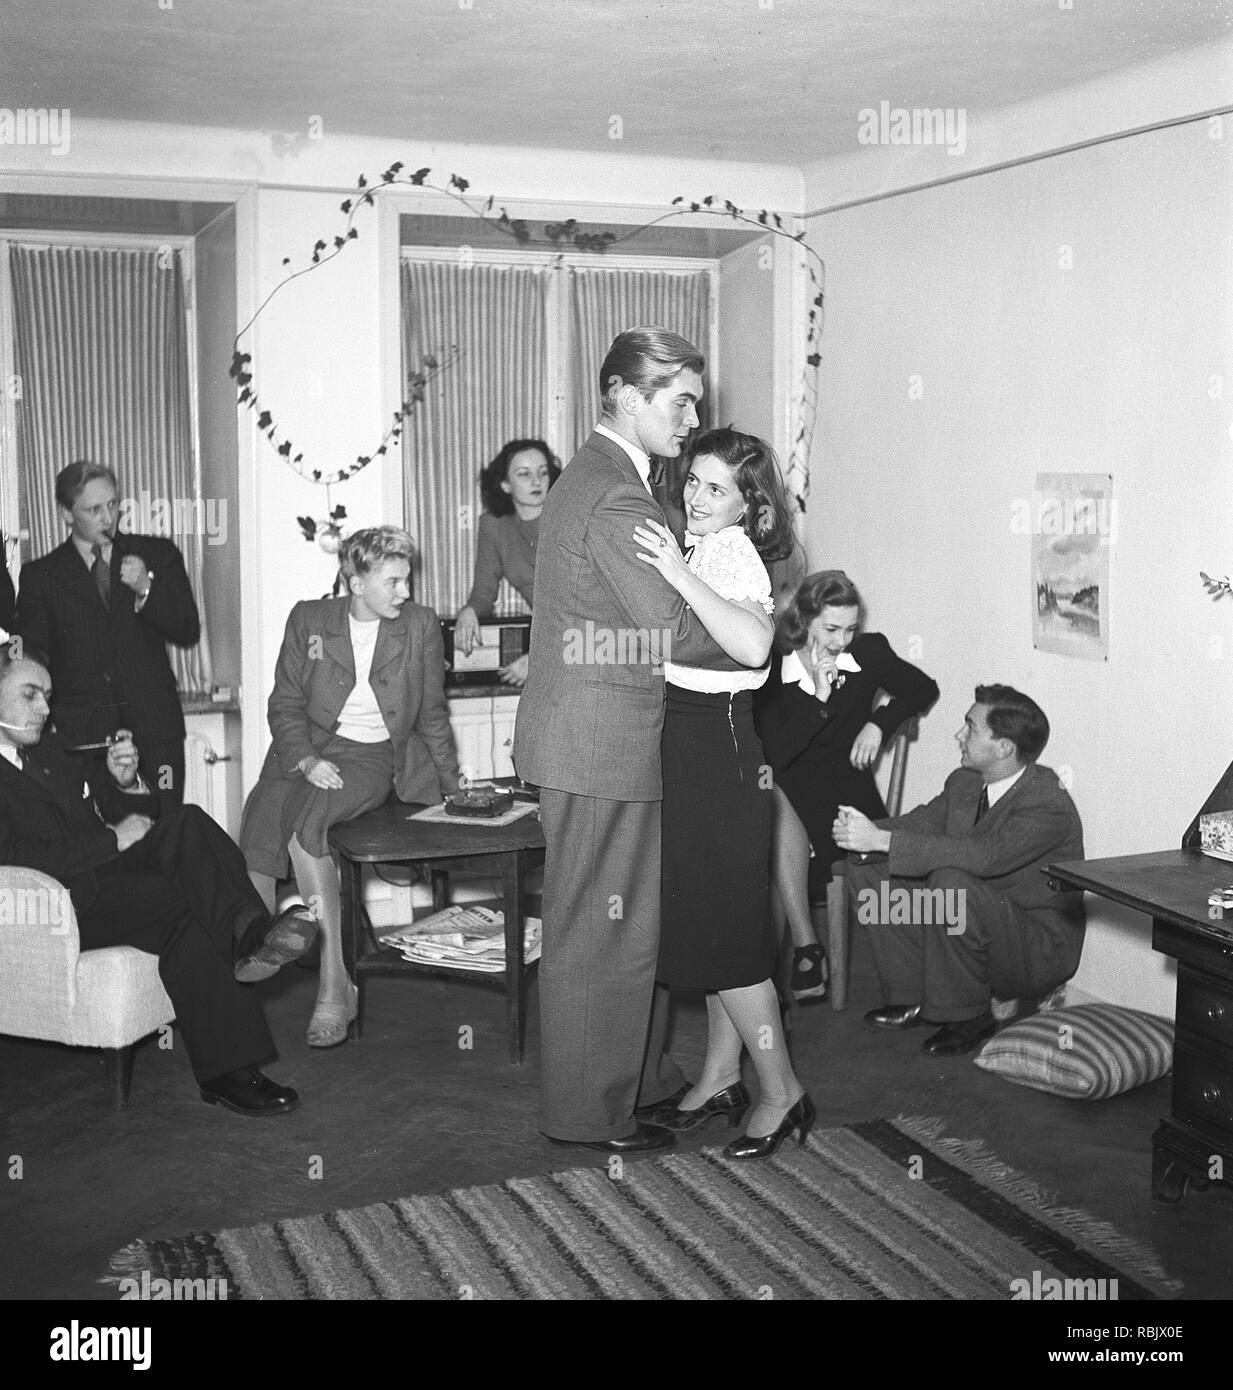 Dancing in the 1940s. A young people at a party is dancing while their friends are sitting. Photo Kristoffersson Ref L4-3. Sweden 1944 Stock Photo